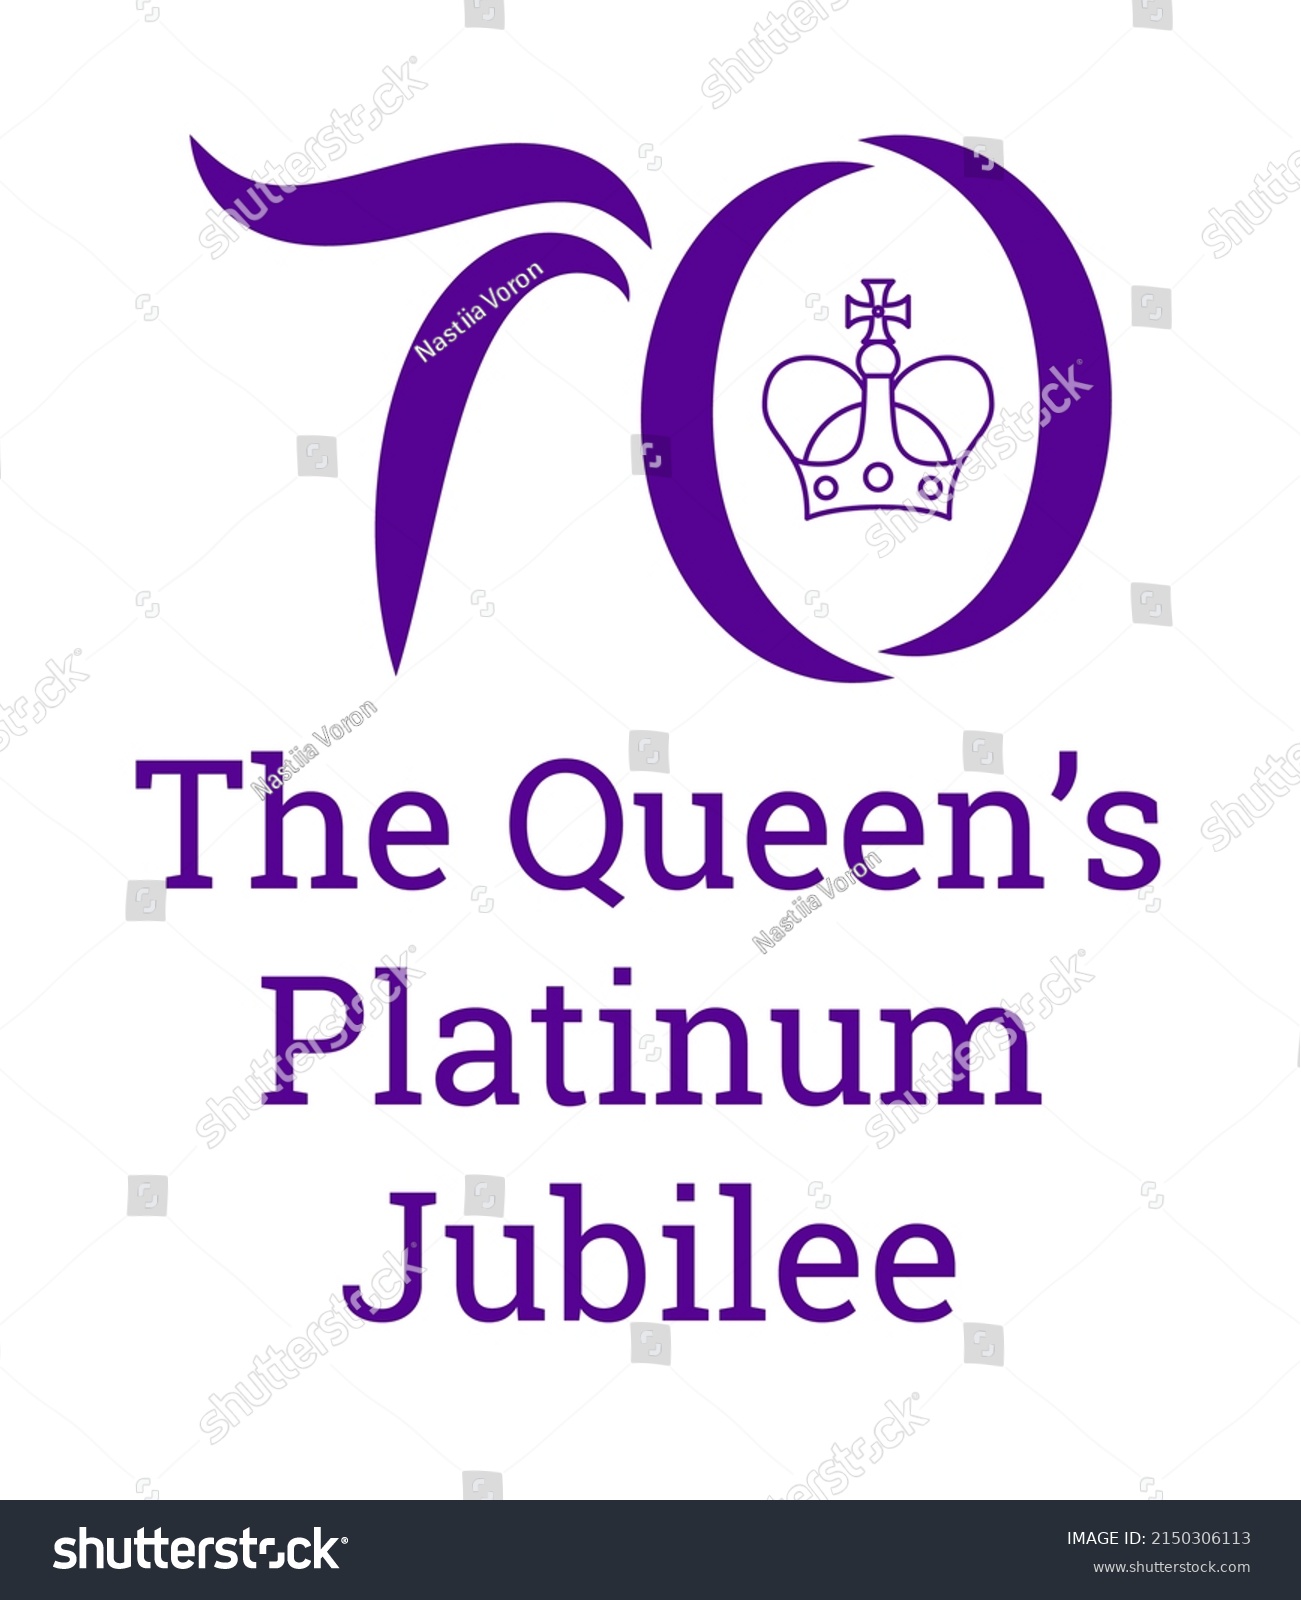 SVG of The Queens Platinum Jubilee in 2022. Number 70 with a crown inside. Record for longest stay on the throne. Great for poster, banner, greeting card, flyer, brochure. Vector illustration svg